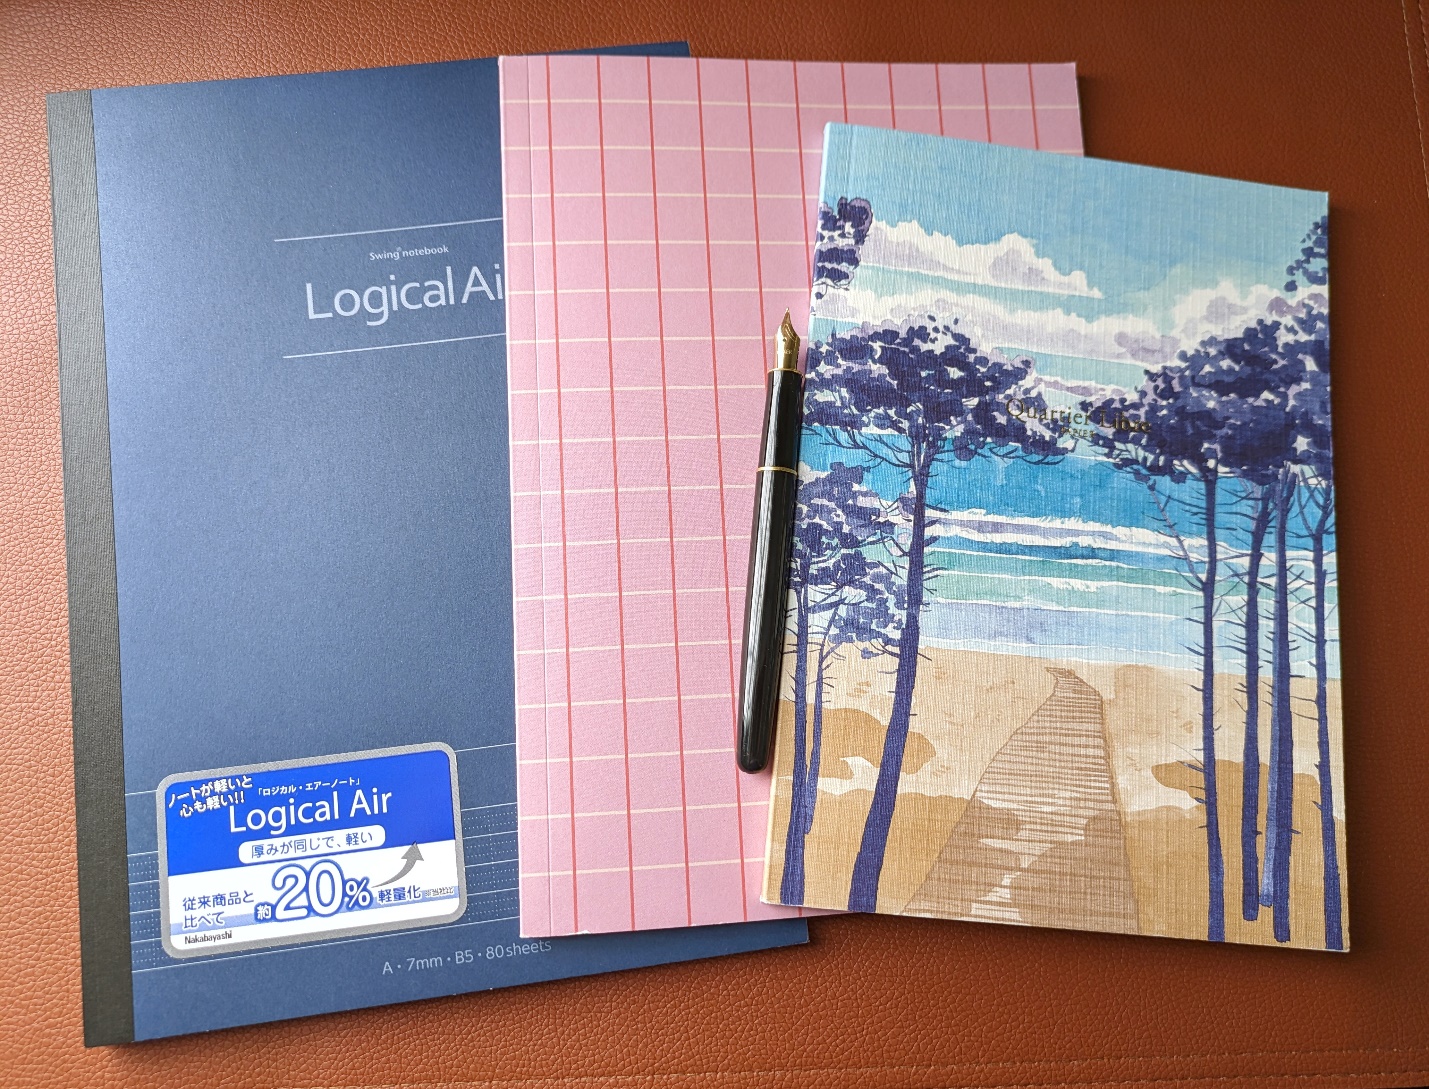 From left - Nakabayashi Logical Air, Notem, and Quartier Libre notebooks from Barnes & Noble. 